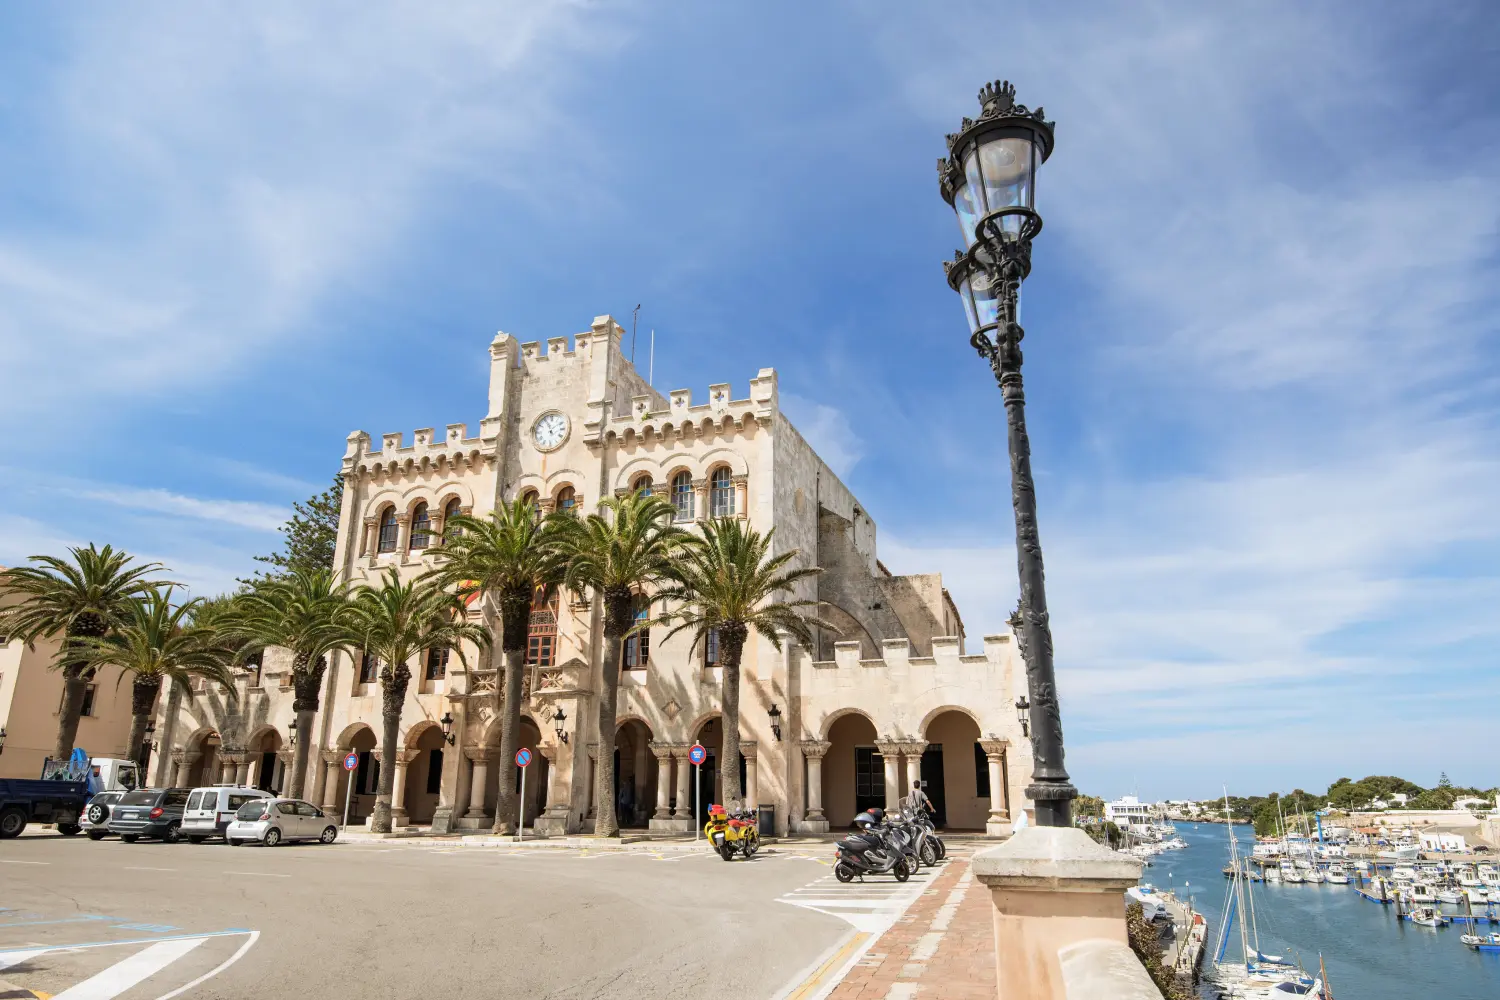 The town hall of Ciutadella and the marina on the right